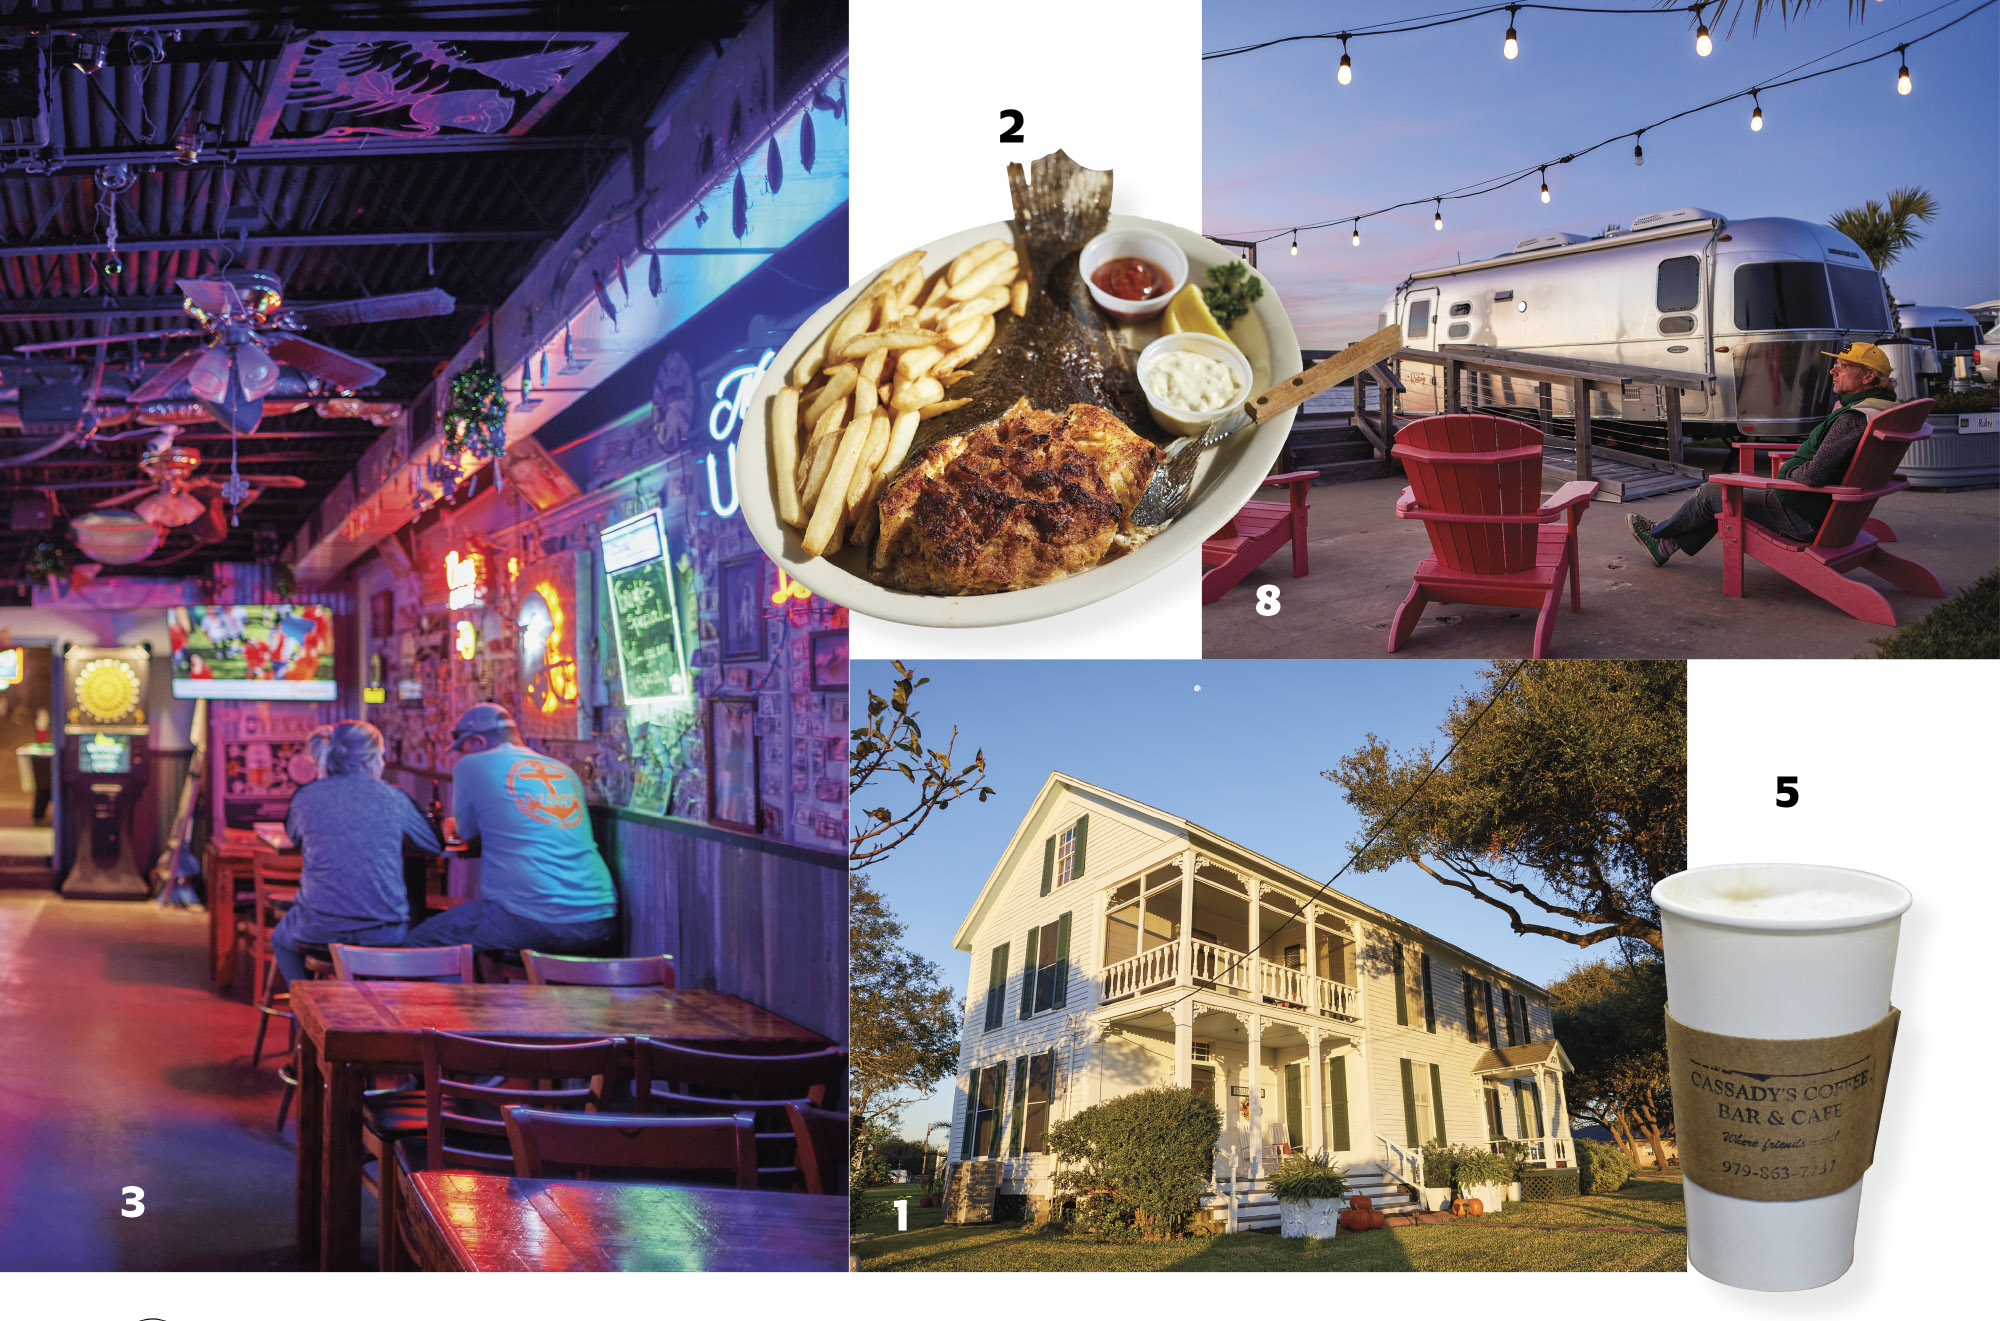 A collection of places, food, drink and activites around Matagorda